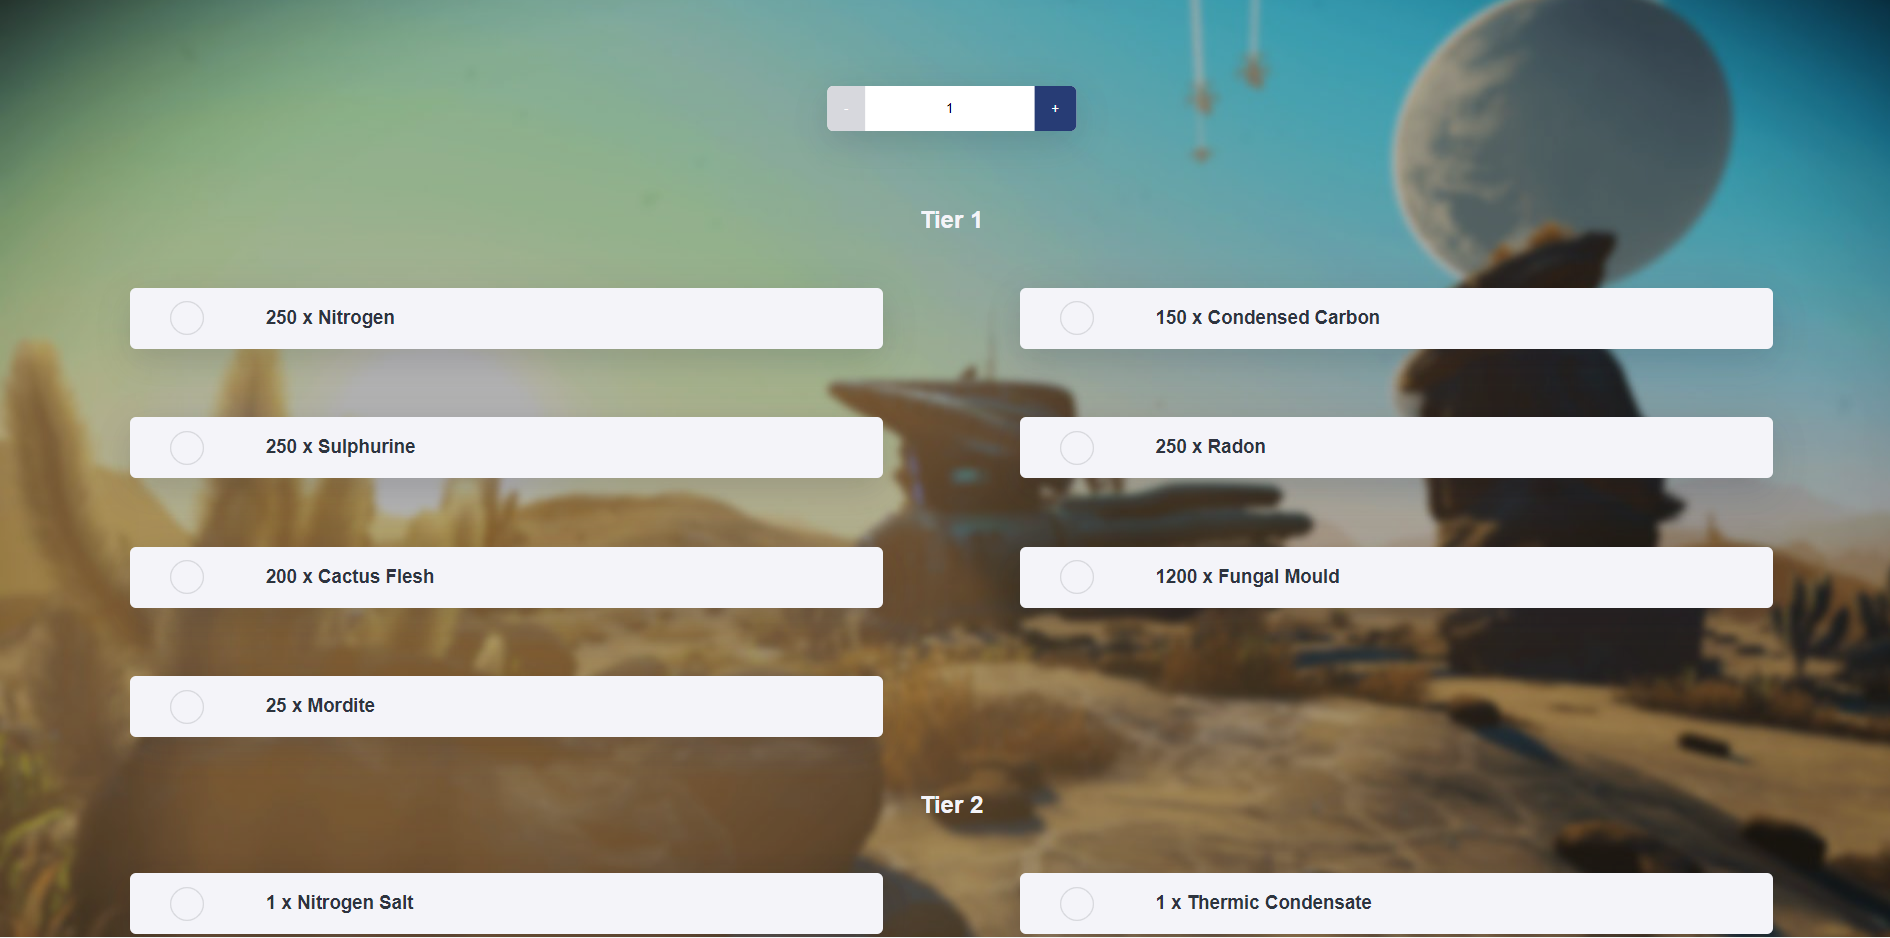 A No Man Sky Calculator Development project by Tea Powered Projects